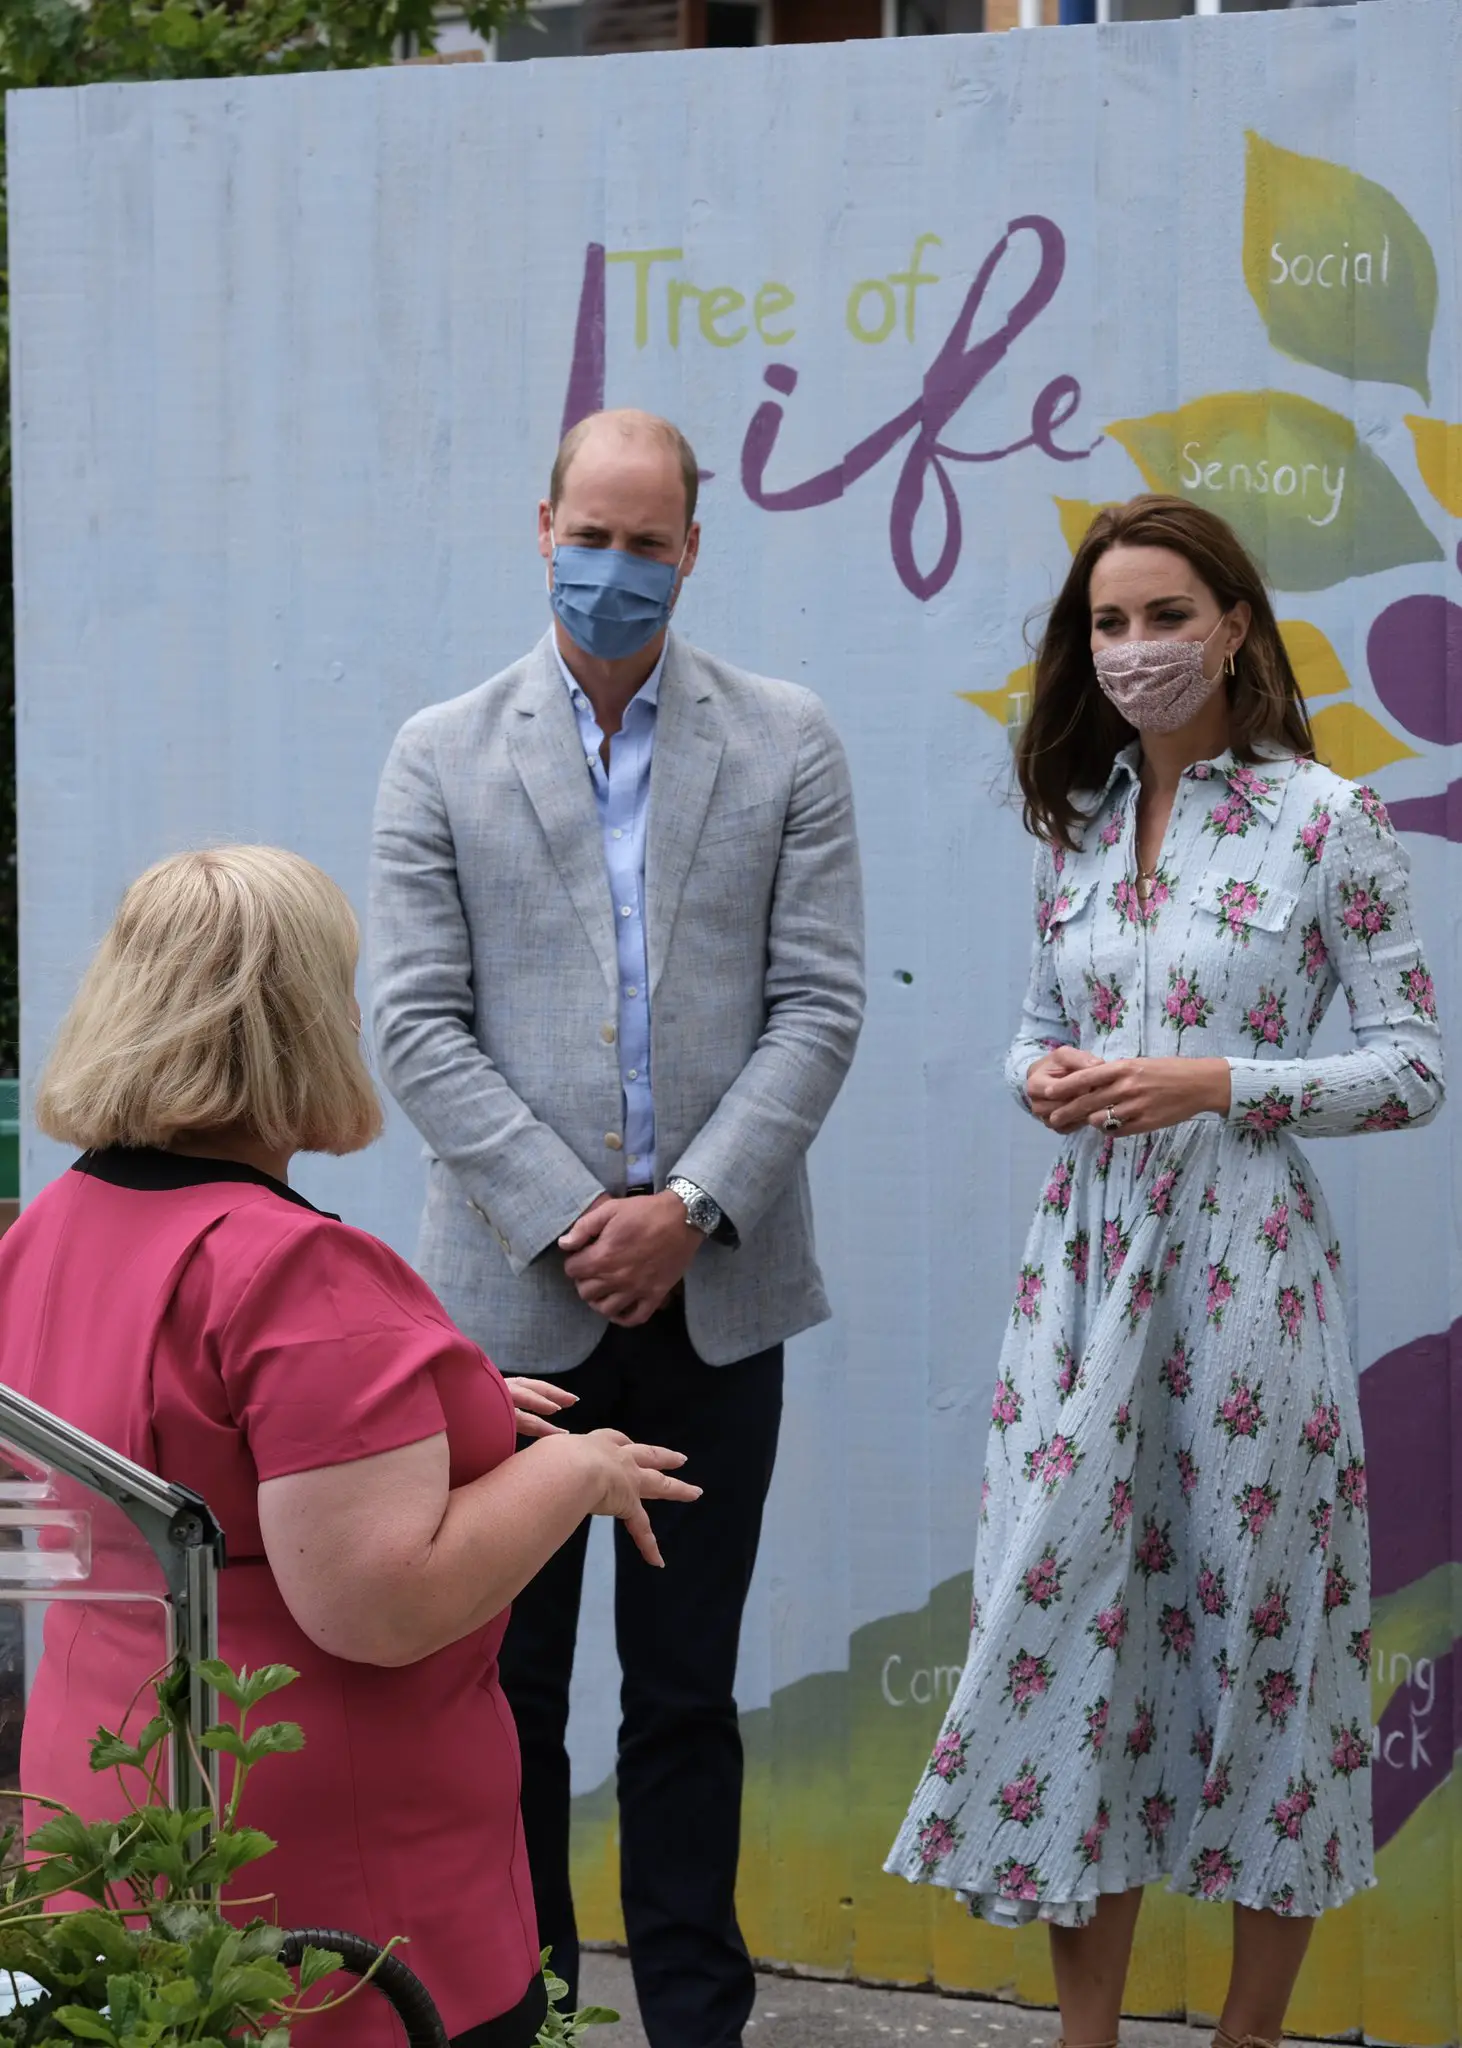 The Duke and Duchess of Cambridge met with the Bingo partners in Cardiff